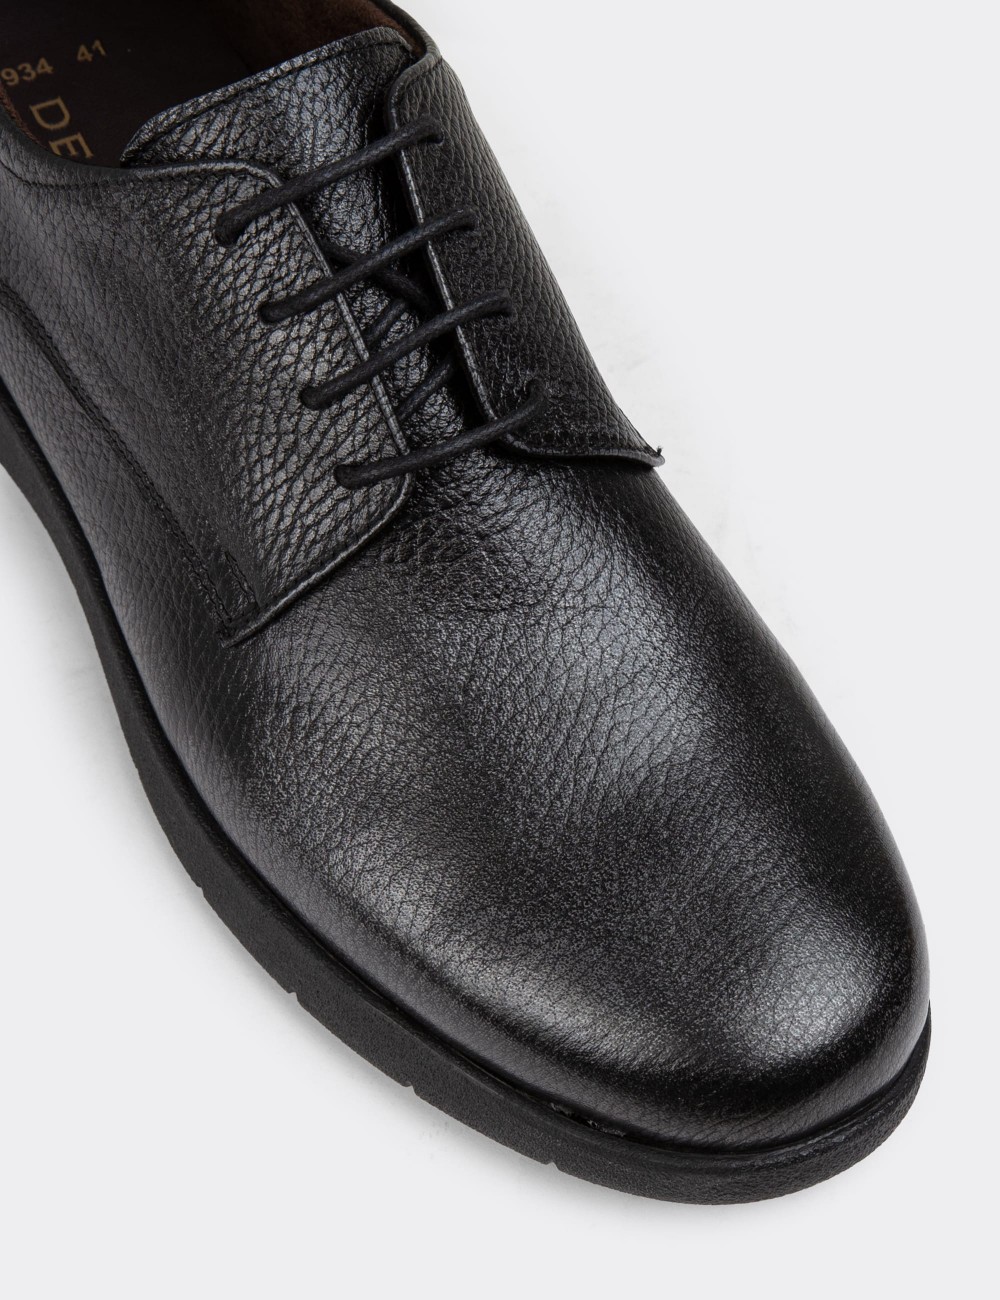 Anthracite Leather Lace-up Shoes - 01934MANTC01